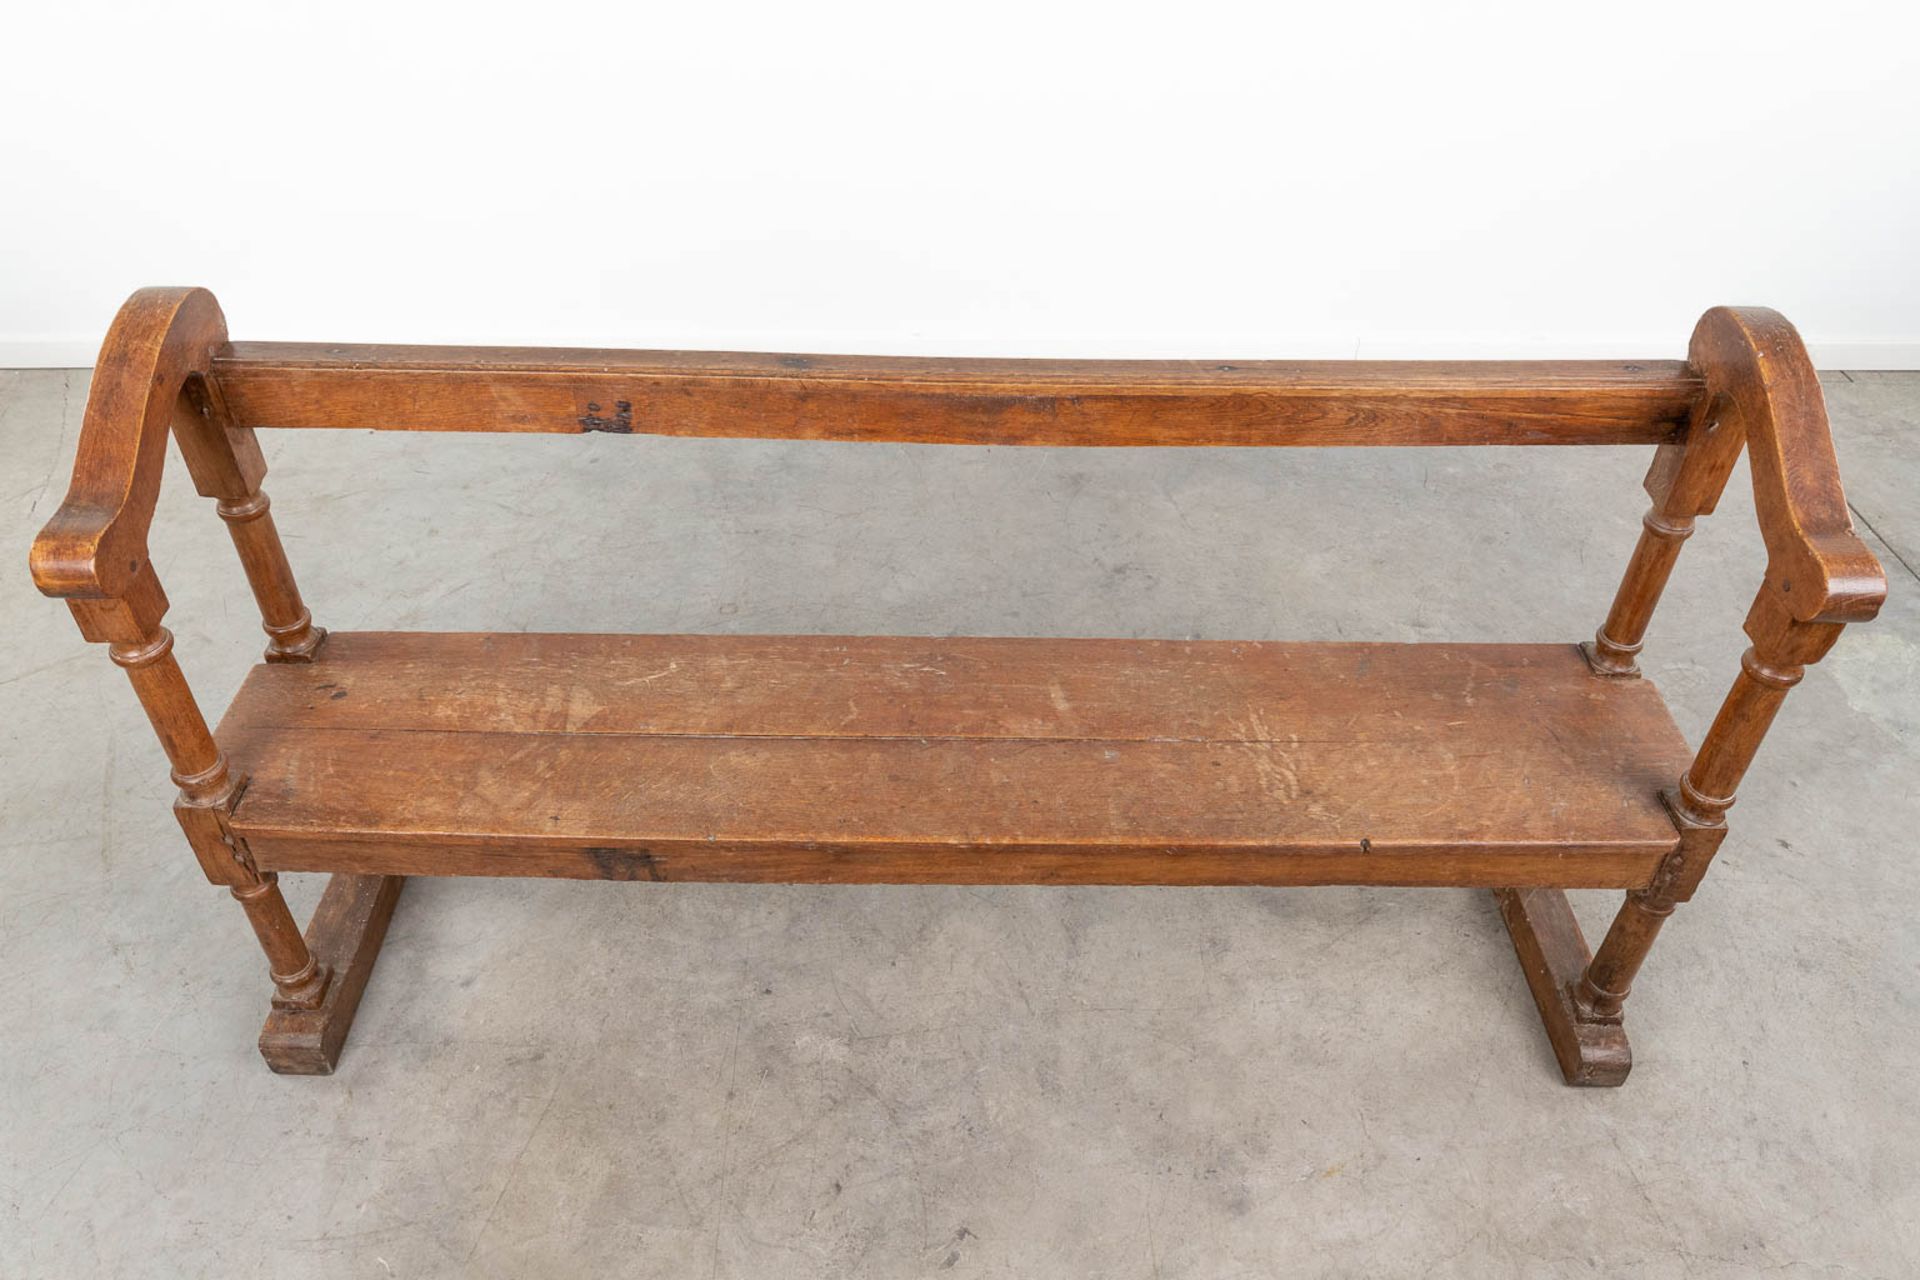 An antique bench made of oak. 19th century. (L:35 x W:164 x H:87 cm) - Image 7 of 11